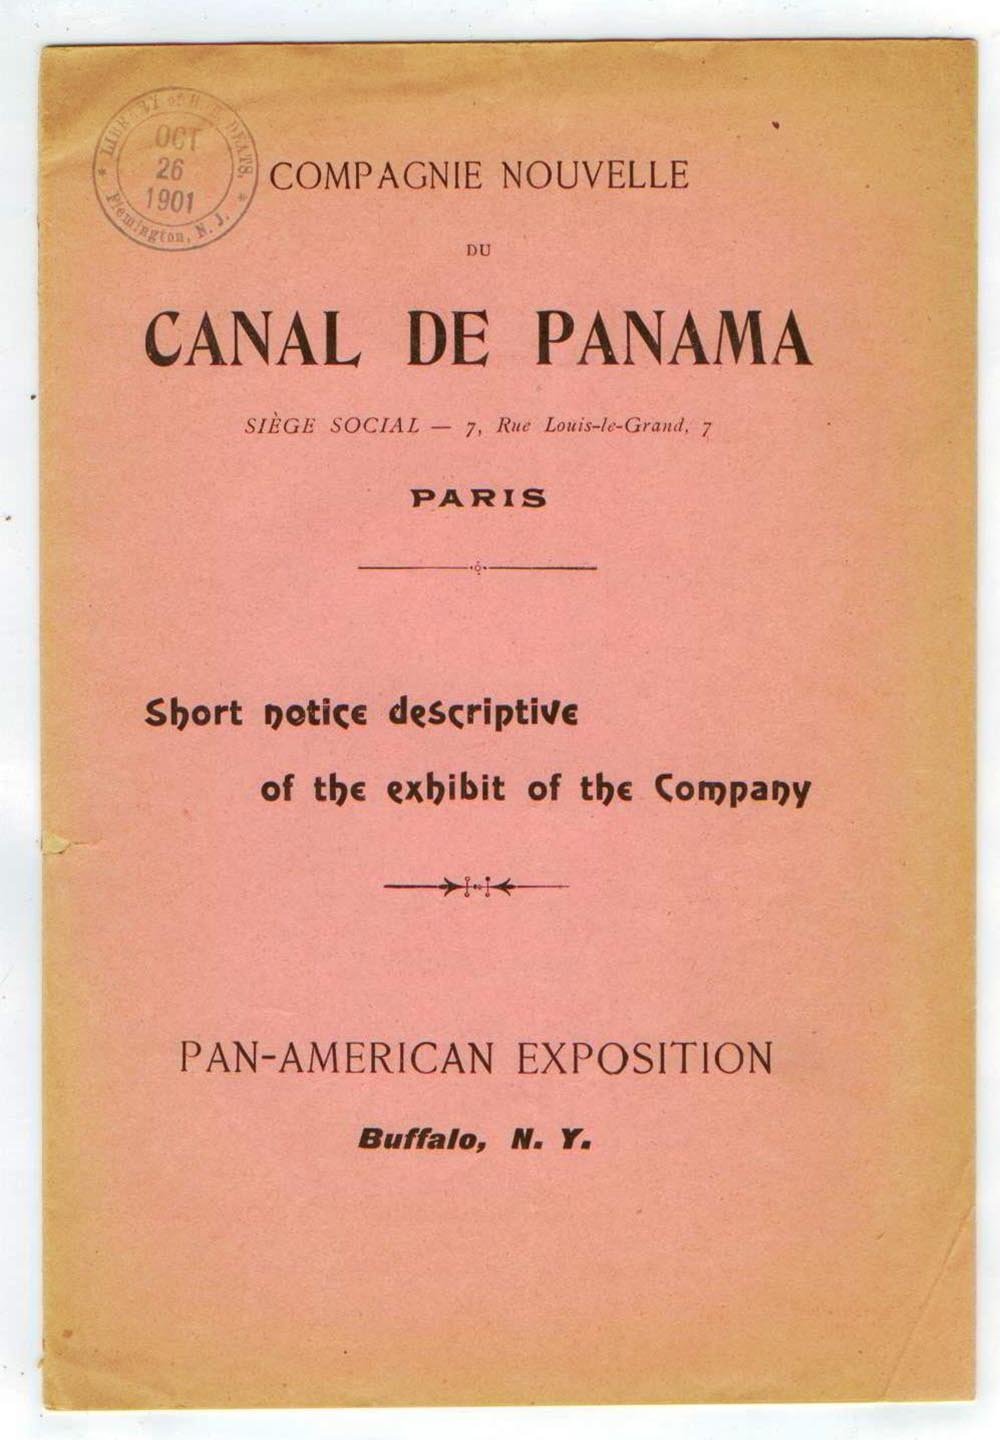 Short Notice Descriptive of the Exhibit Of the New Panama Canal Company, Pan-American Exposition, Buffalo, N.Y.